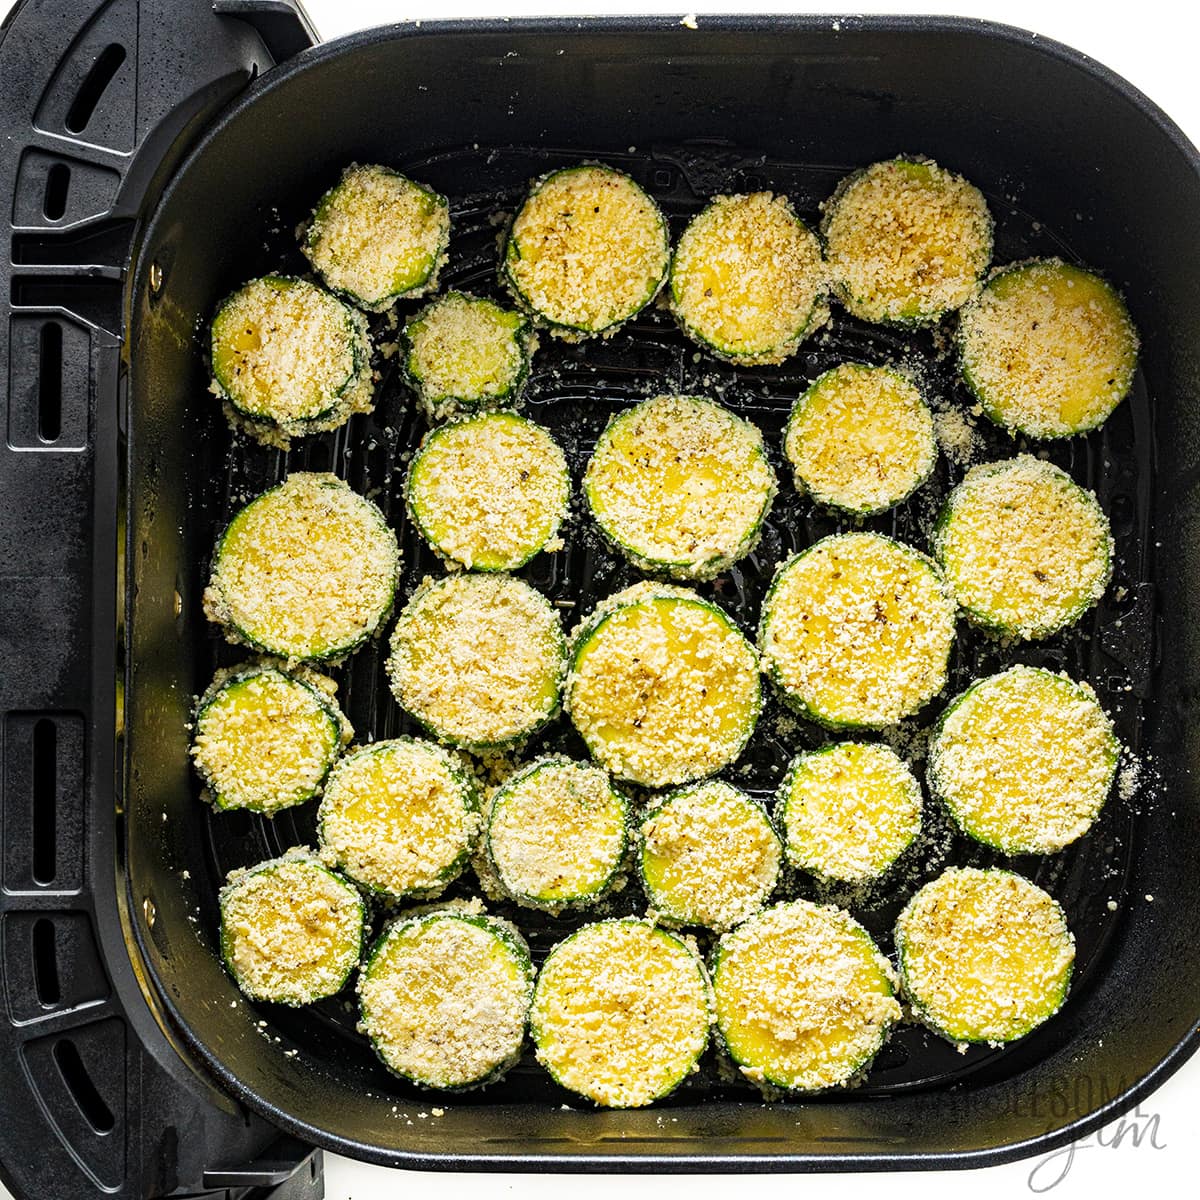 Zucchini in air fryer basket before cooking.